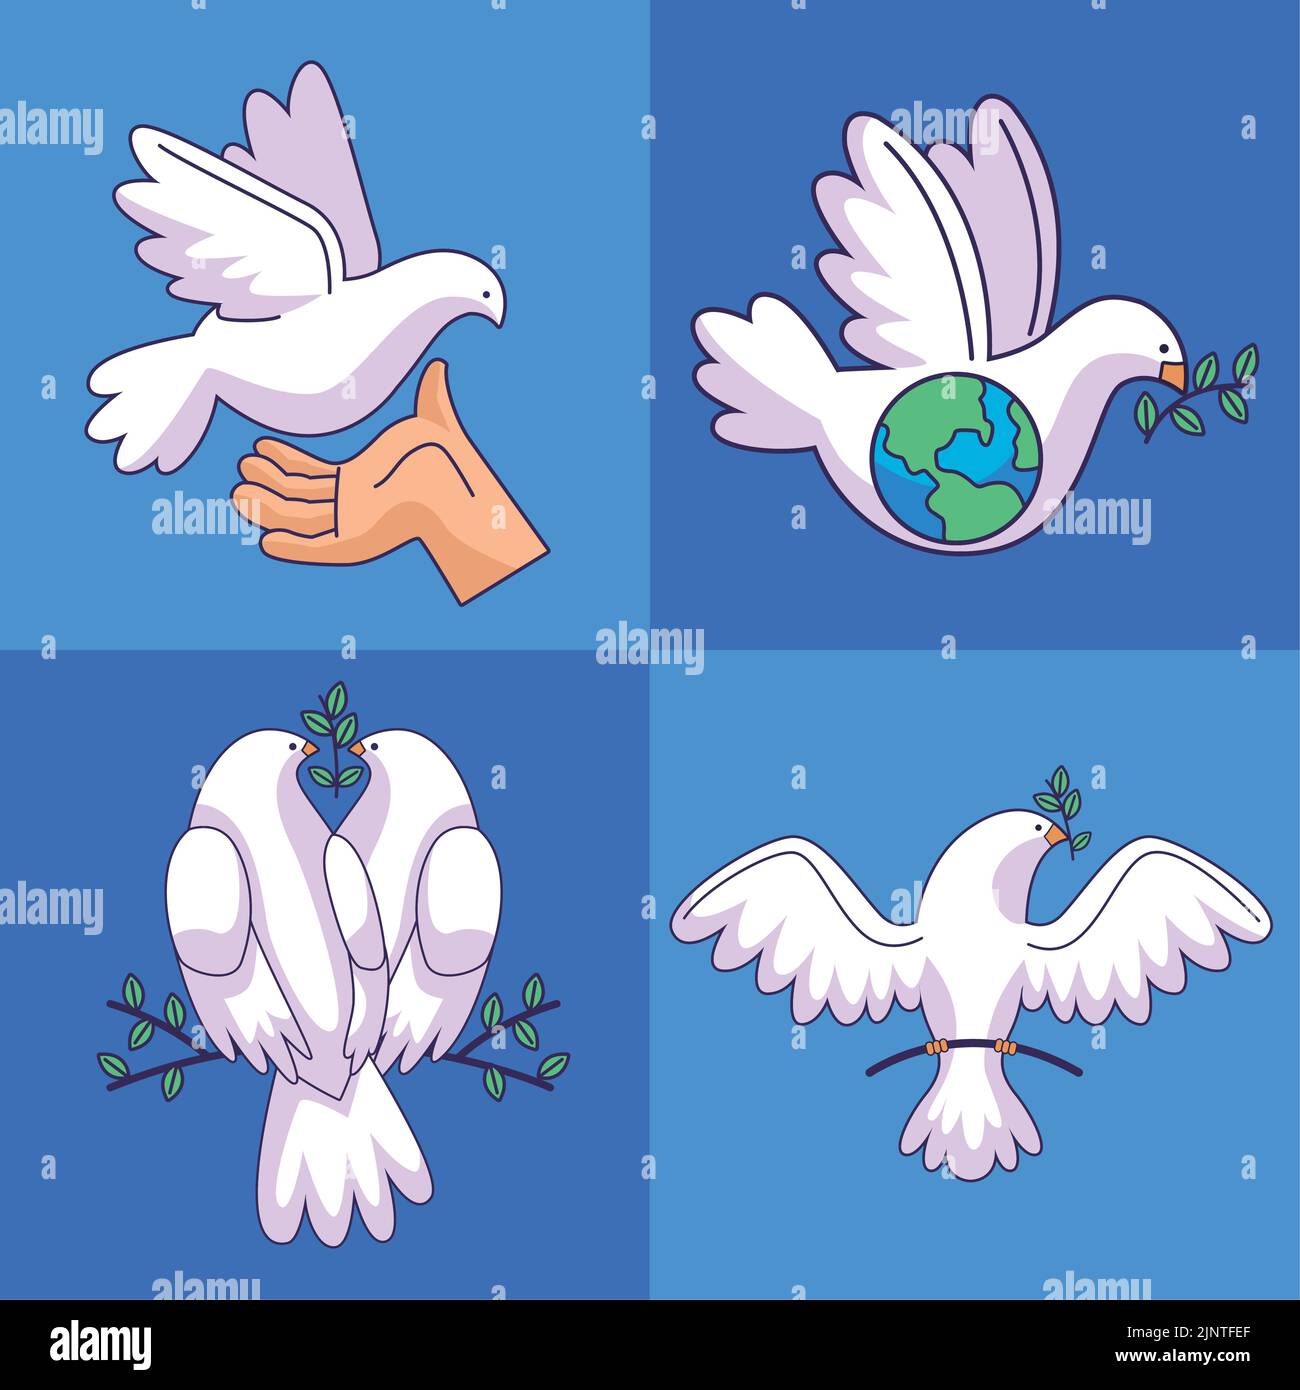 four peace dove icons Stock Vector